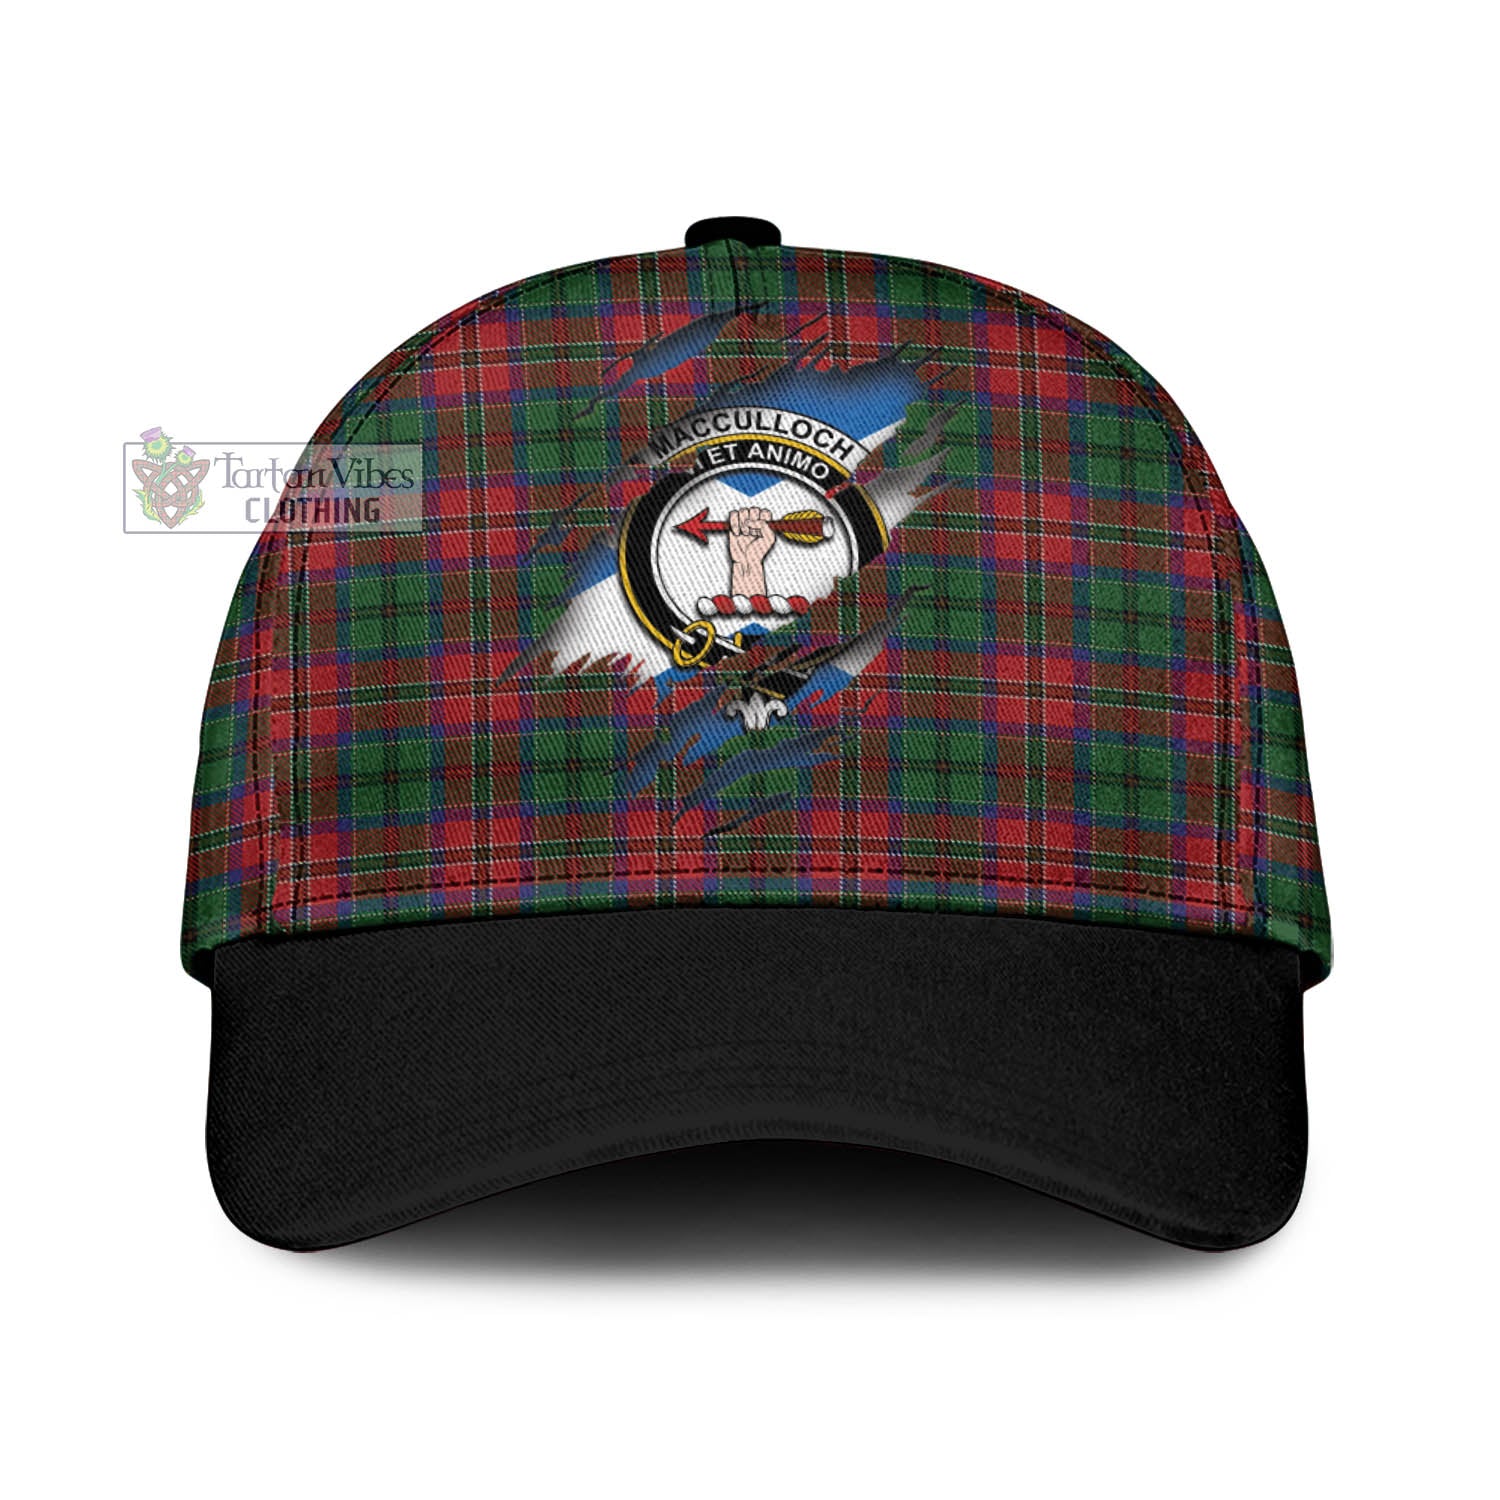 Tartan Vibes Clothing MacCulloch Tartan Classic Cap with Family Crest In Me Style